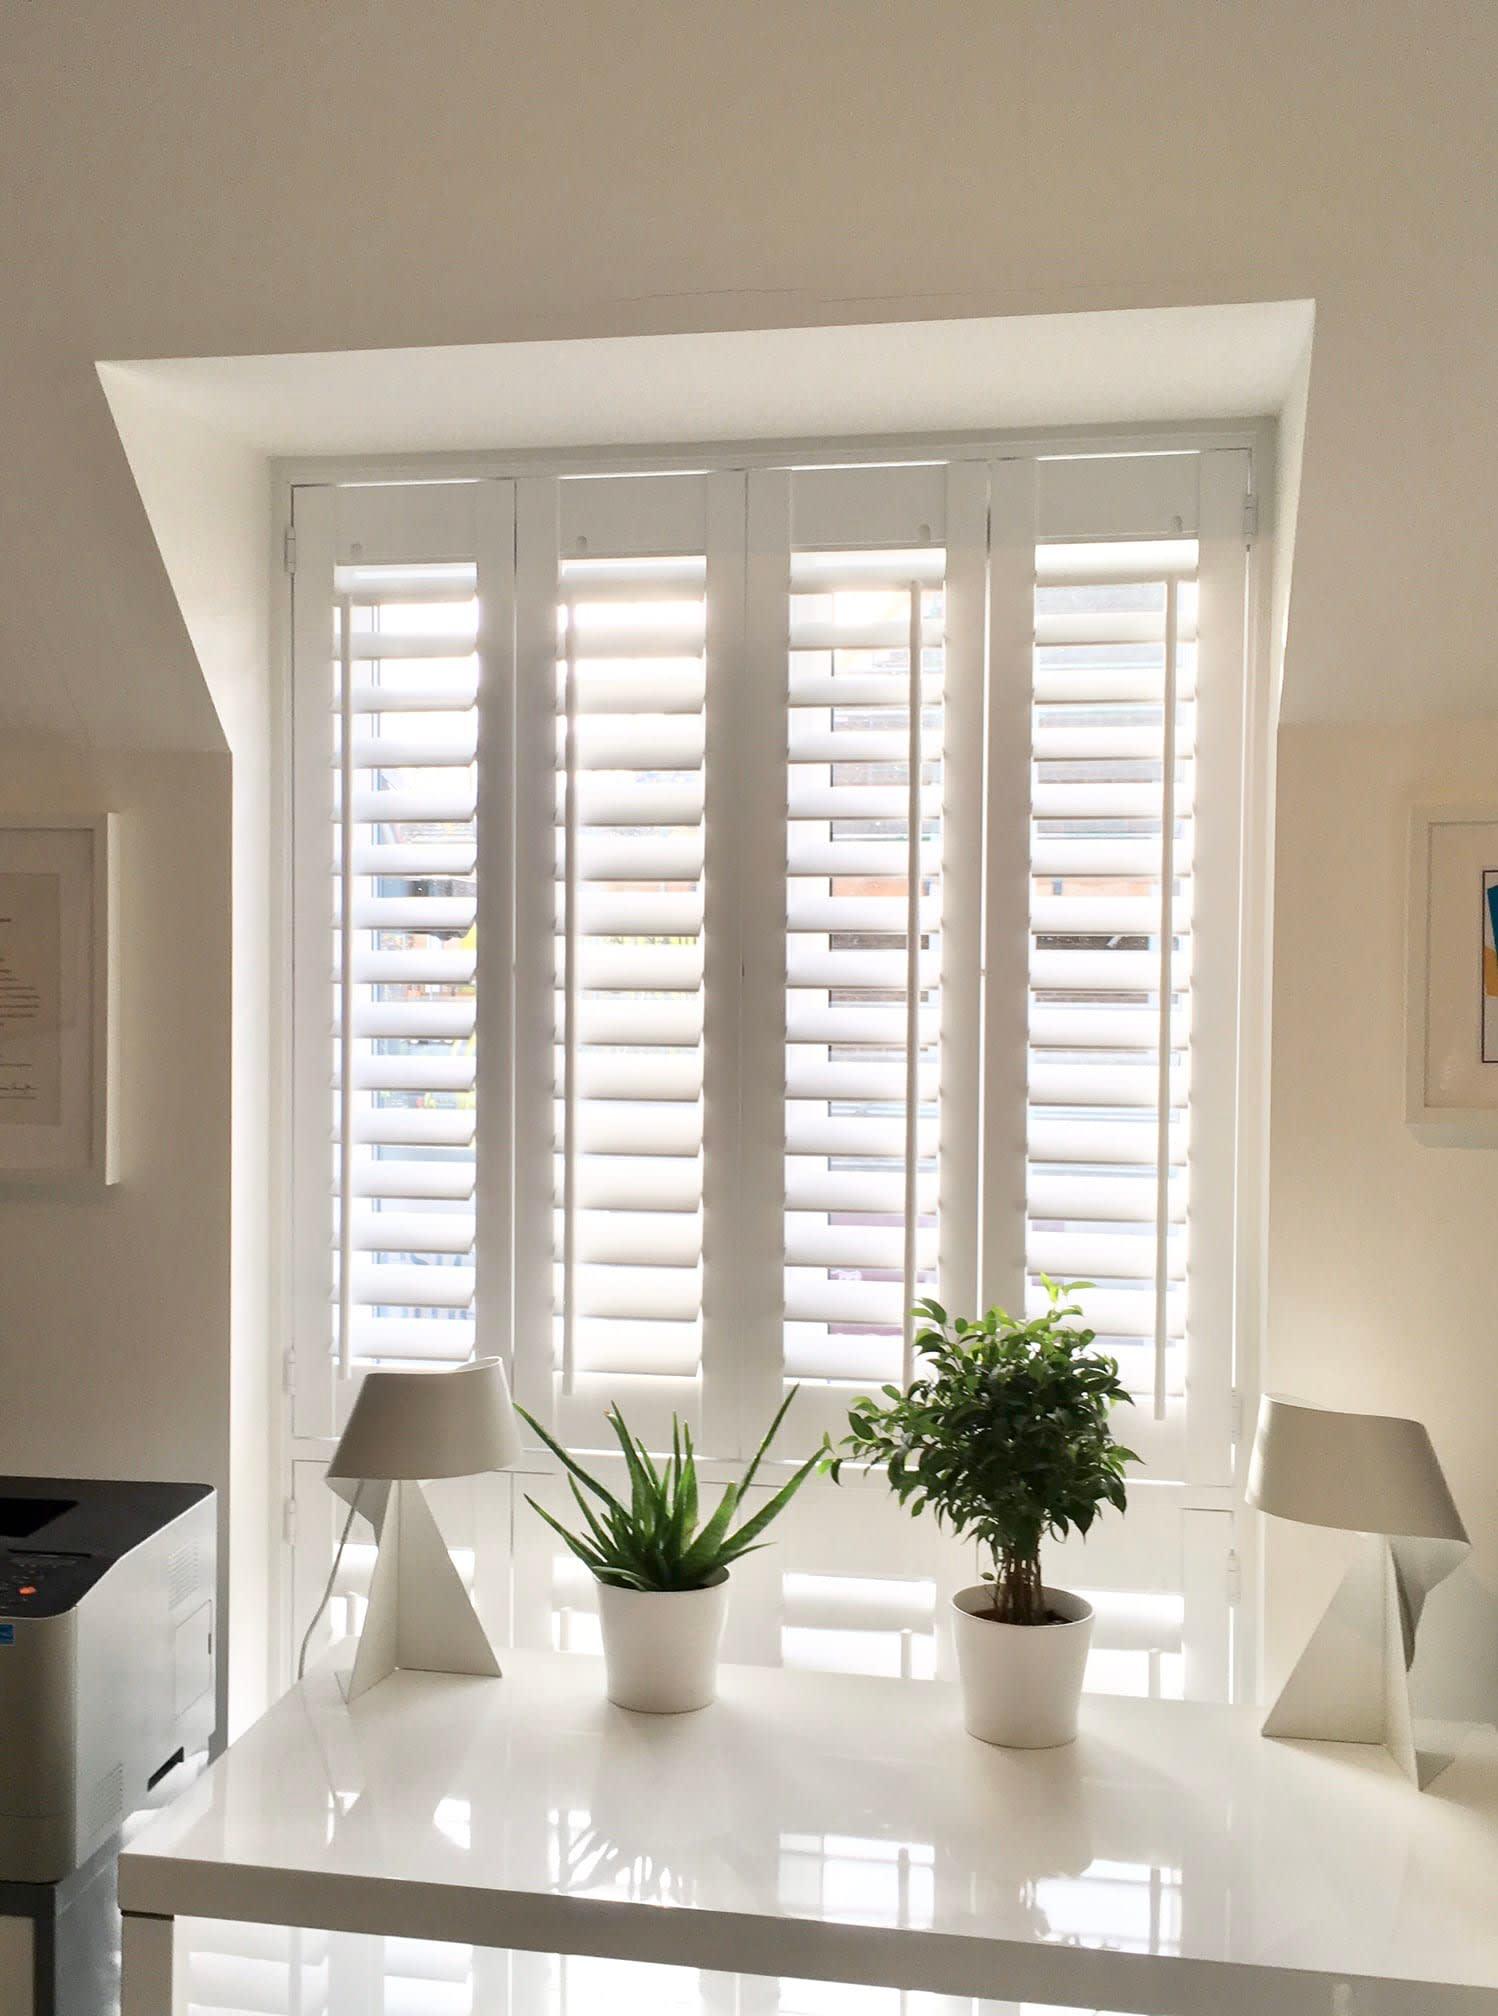 Images RB Shutters & Blinds